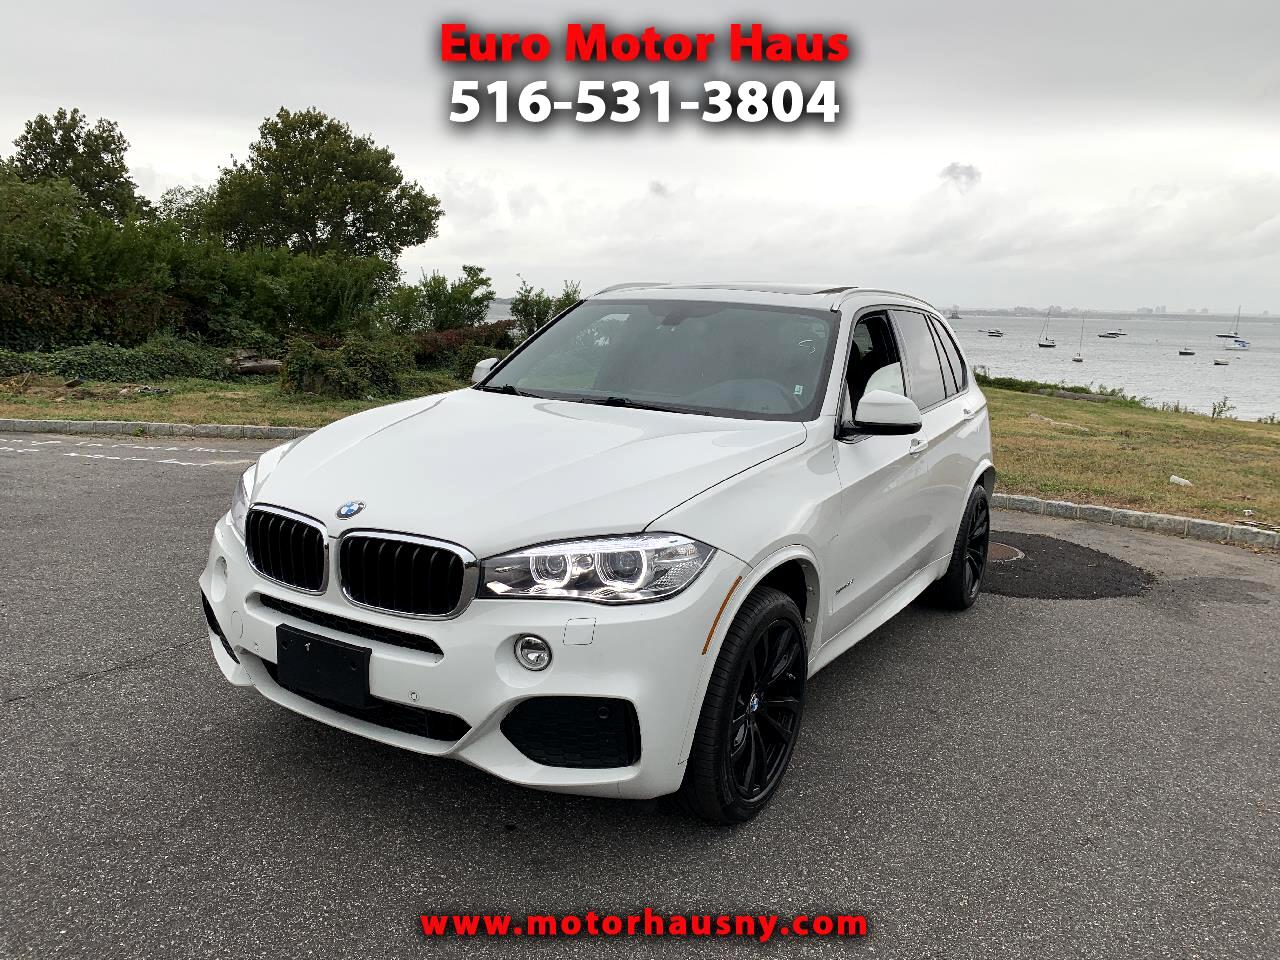 Used 2017 BMW X5 Sold in Great Neck NY 11021 Euro Motor Haus